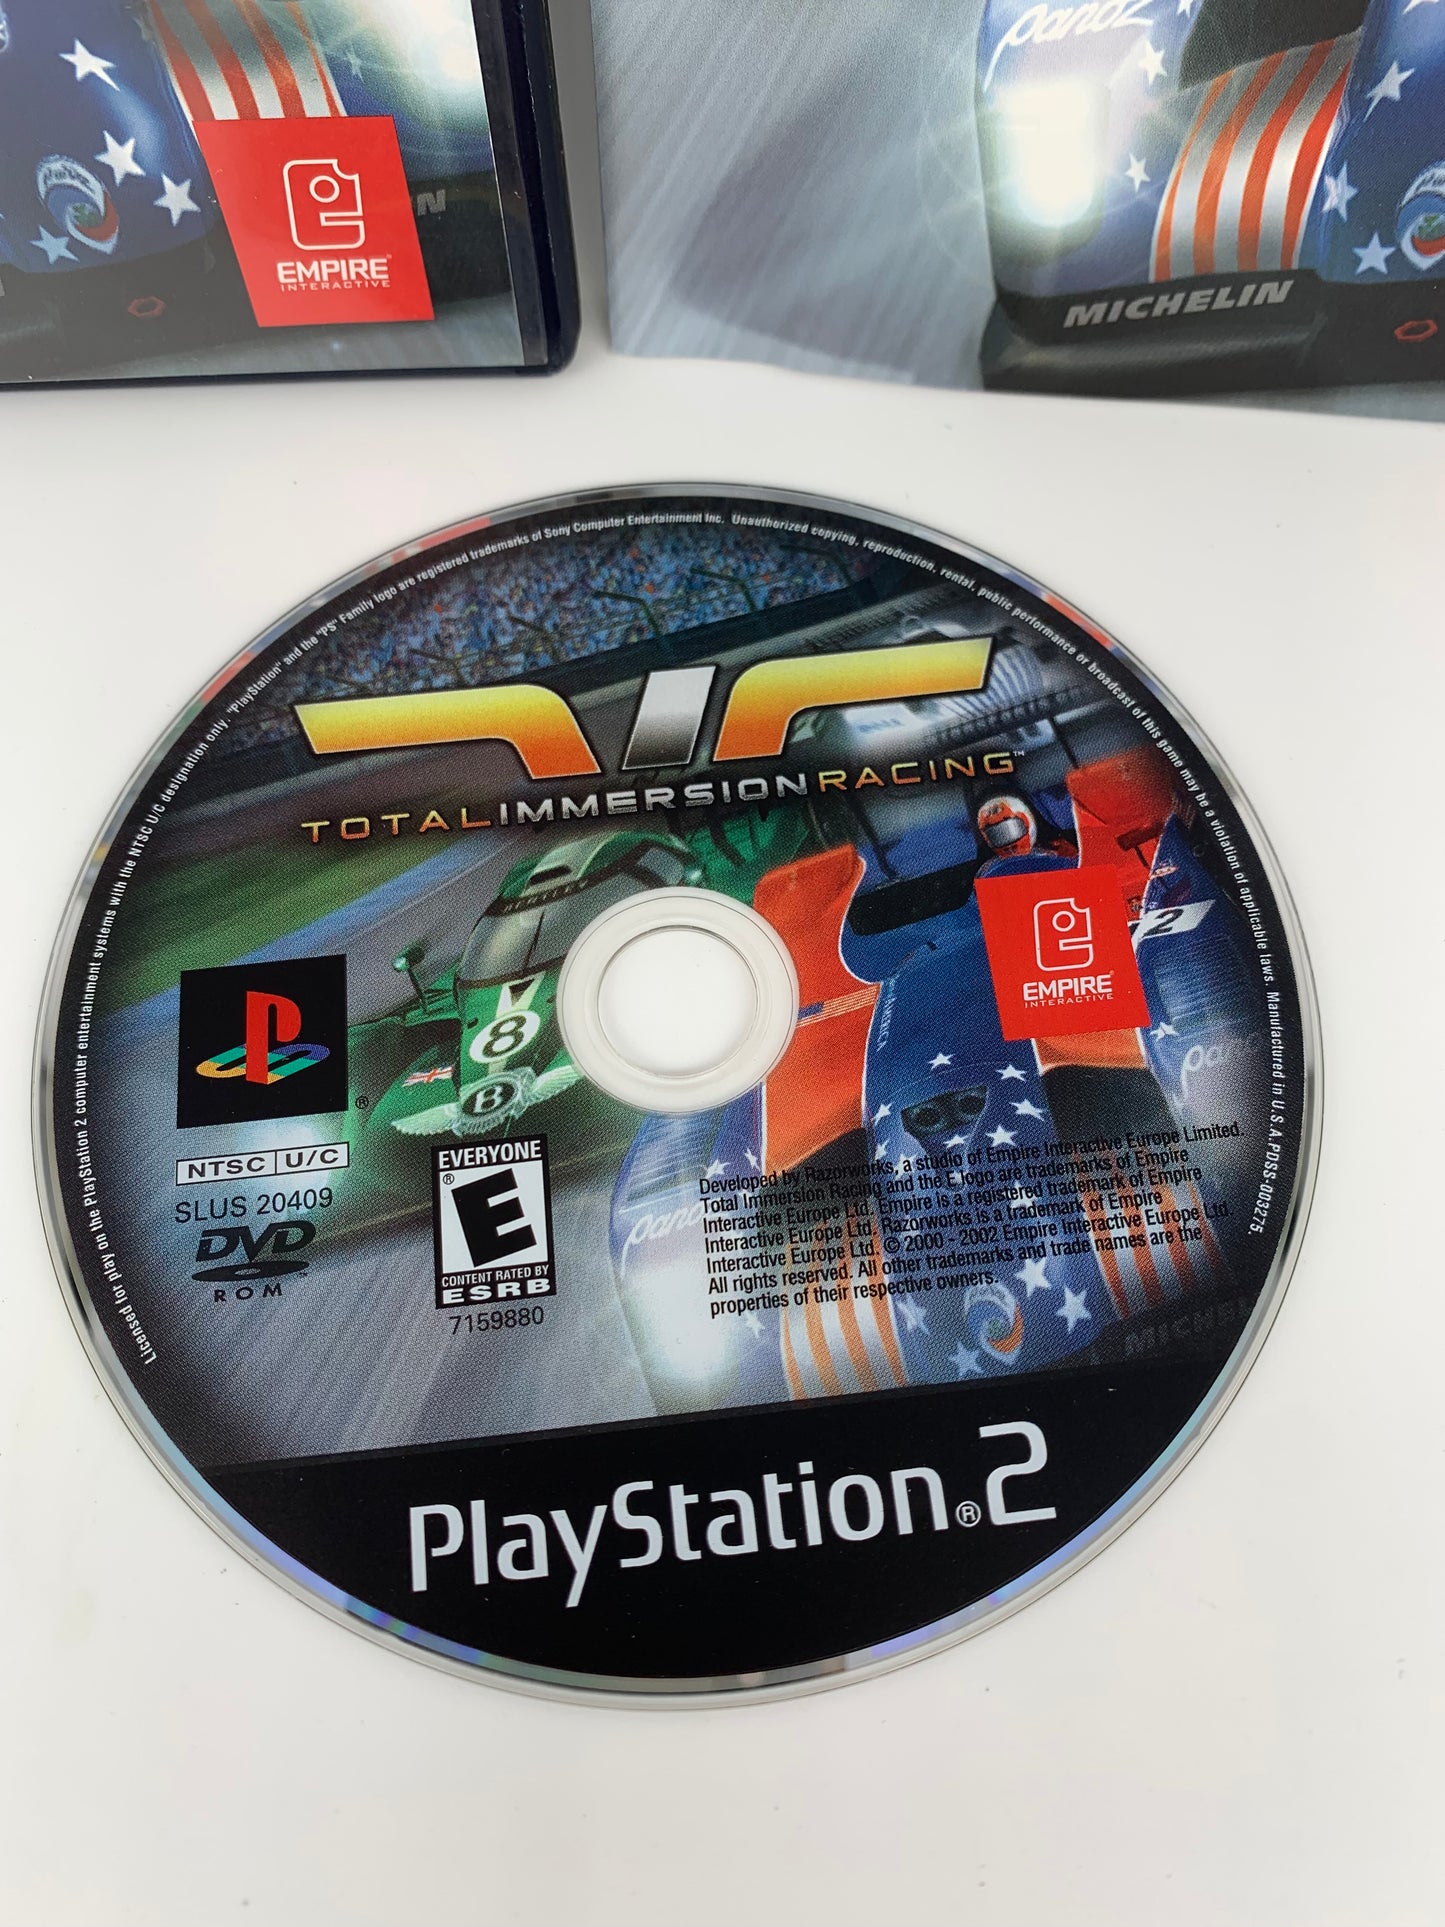 SONY PLAYSTATiON 2 [PS2] | TOTAL iMMERSiON RACiNG